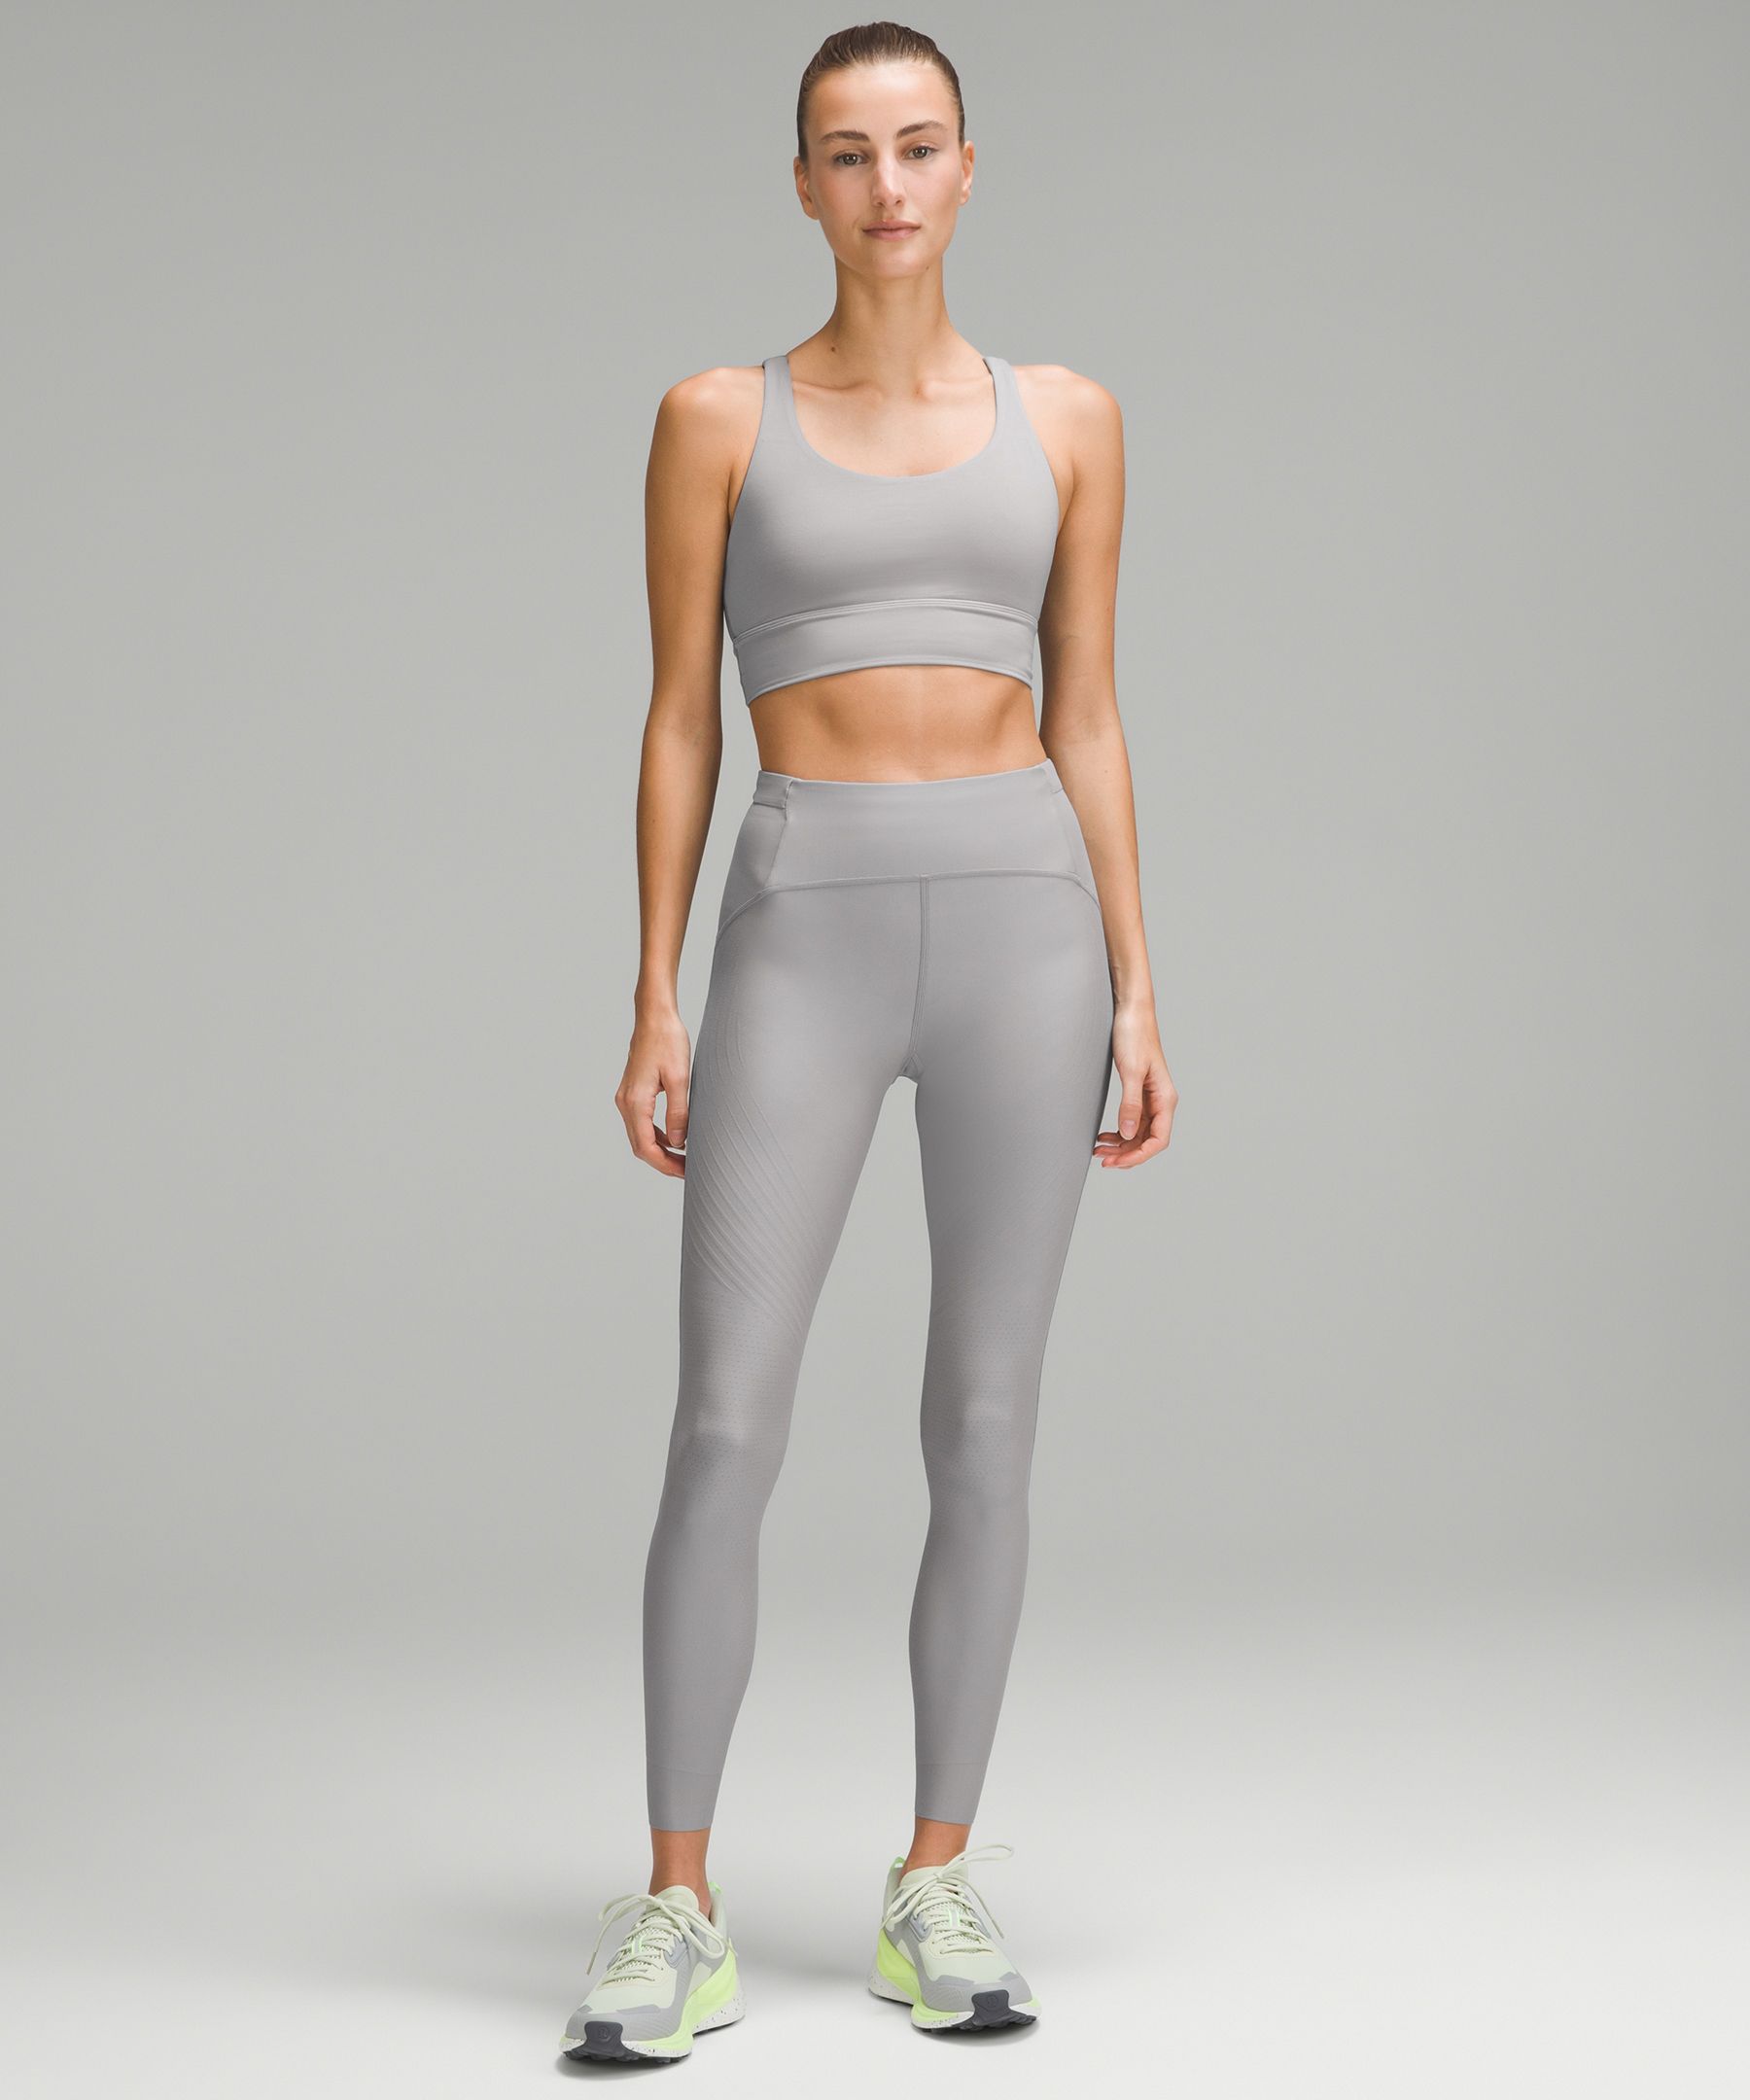 Price drop of $168 to $98? Is this a mistake? It's not on WMTM. Thoughts on  Senseknit HR running tights? : r/lululemon